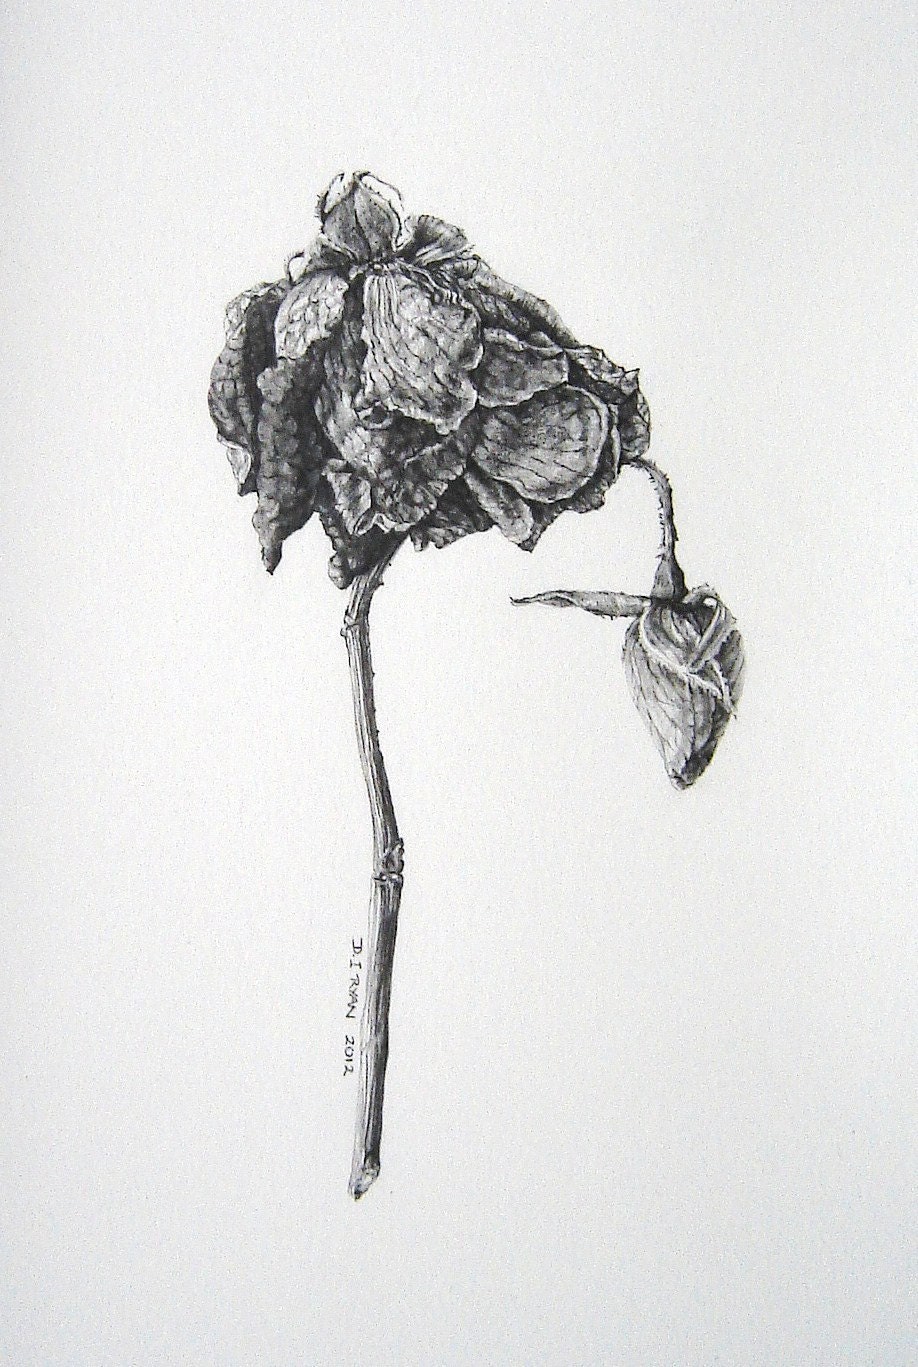 Art - Limited Edition Glicee Print from Original Drawing - Dried Flower and Bud - Botanical - Winter - Home Decor - Worksonpaperart